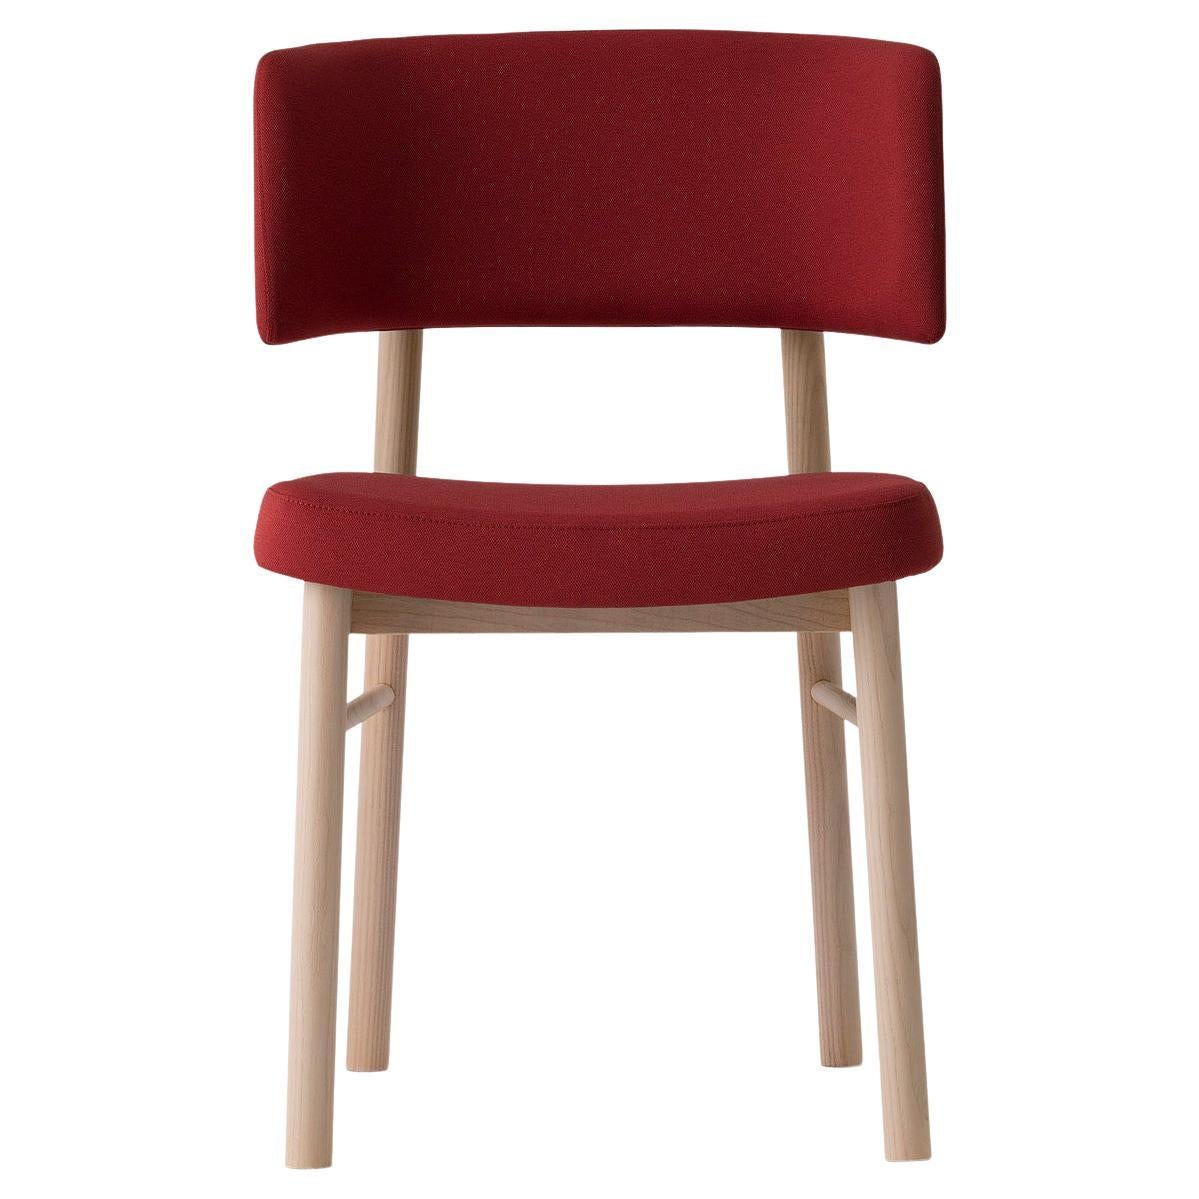 Marlen Chair 0151 LE Red, Blue, Green, Grey, Chair, Living, Home, Contract, Wood For Sale